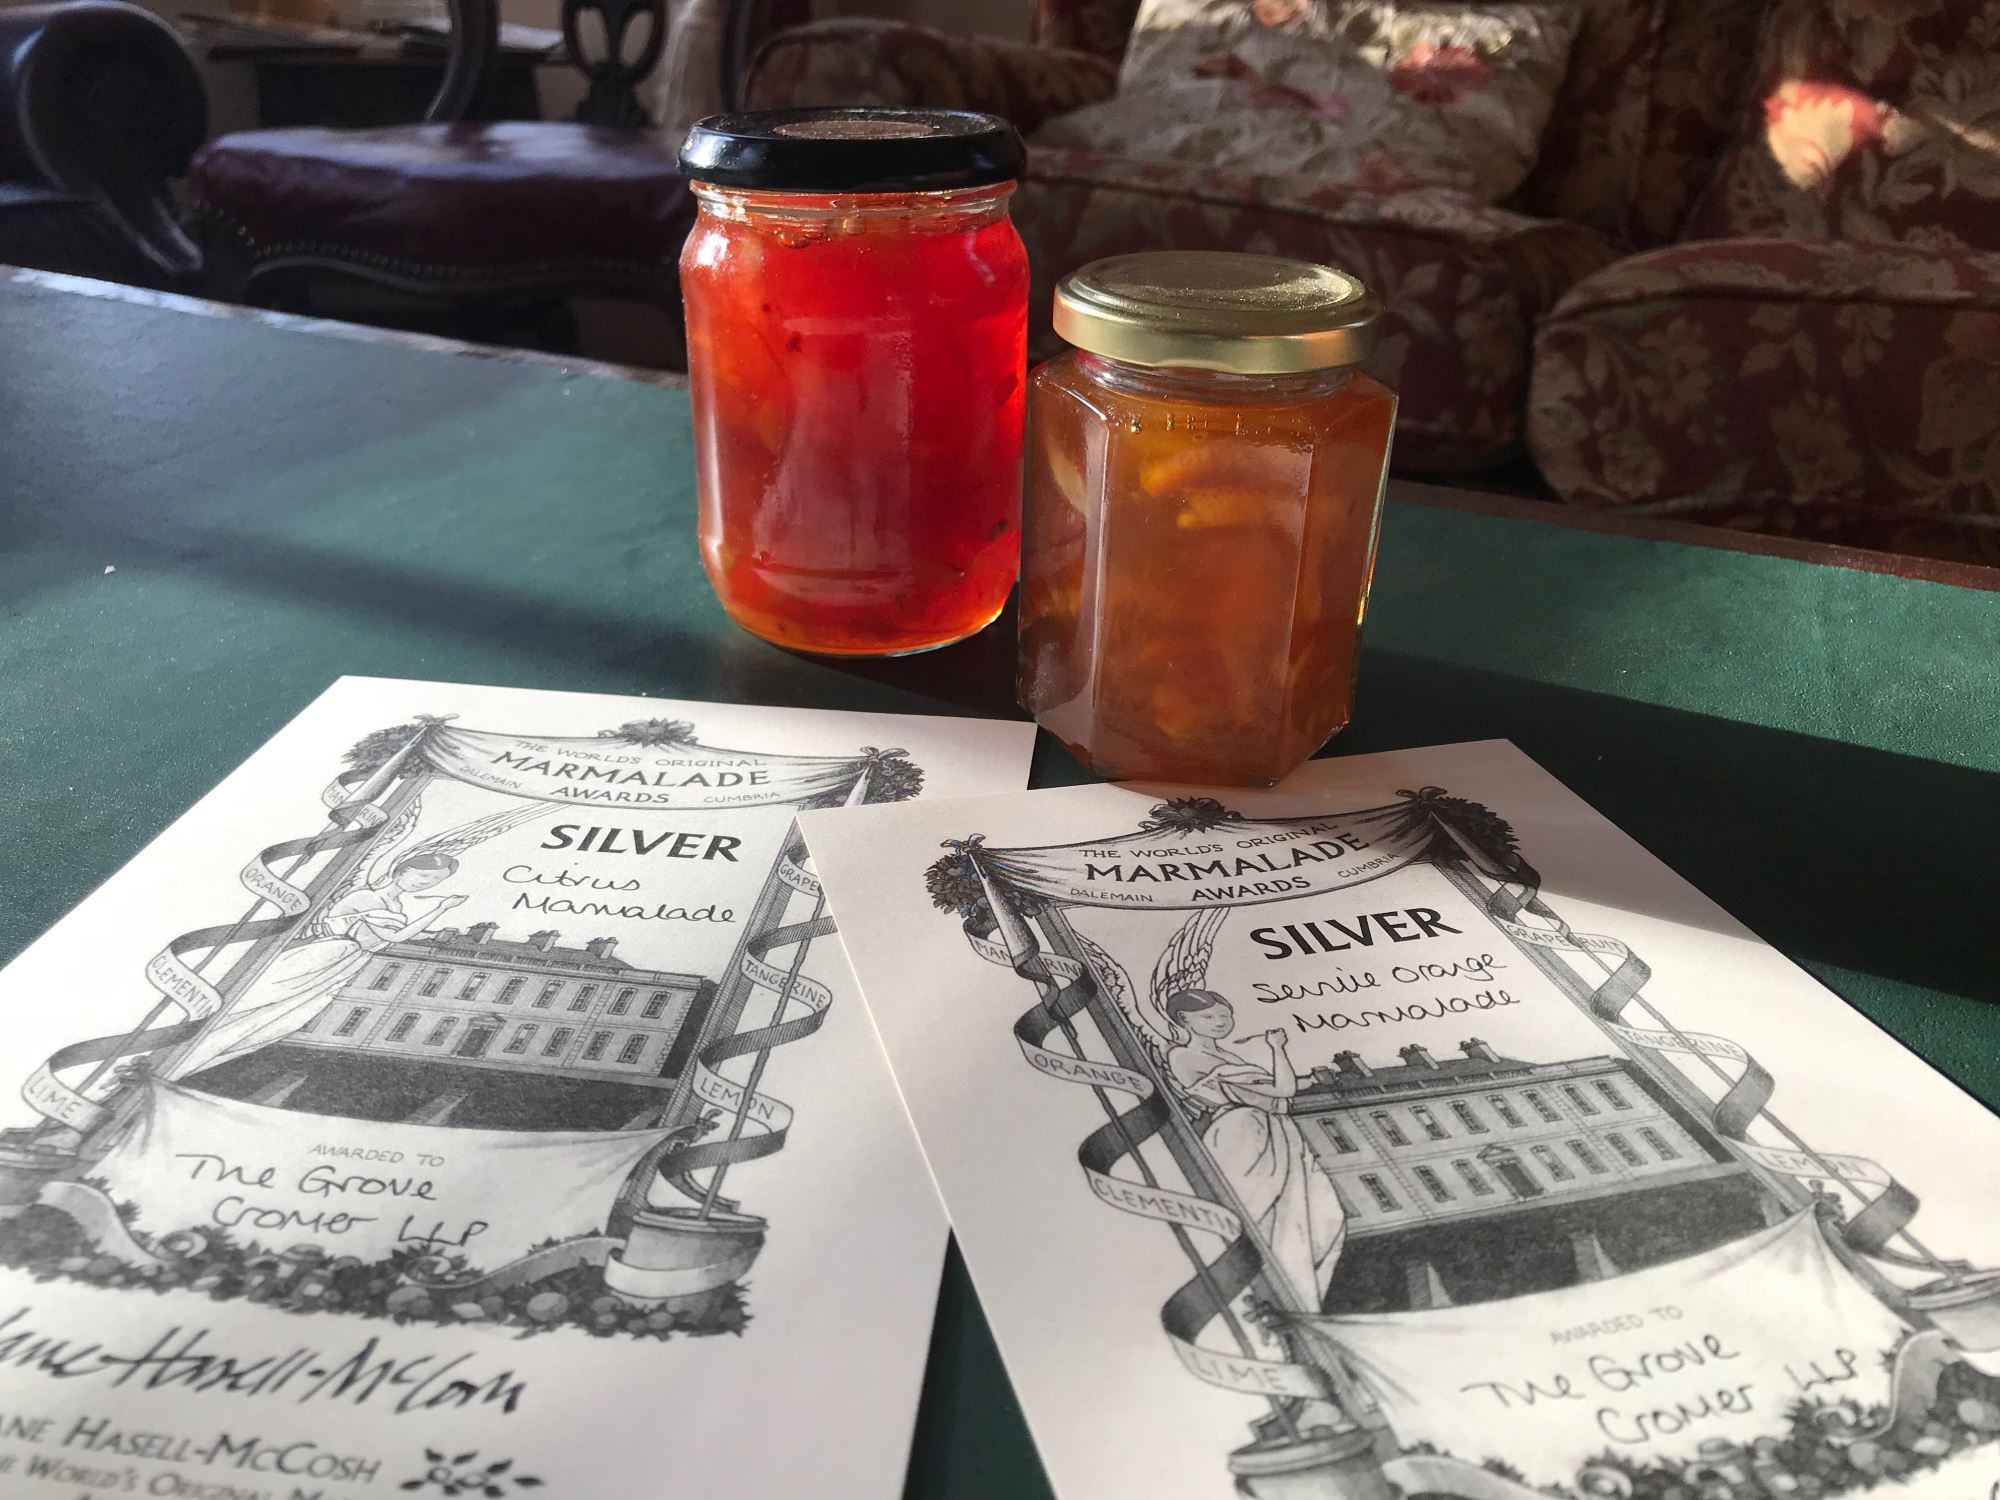 Menu and Marmalade – The latest from The Grove Cromer